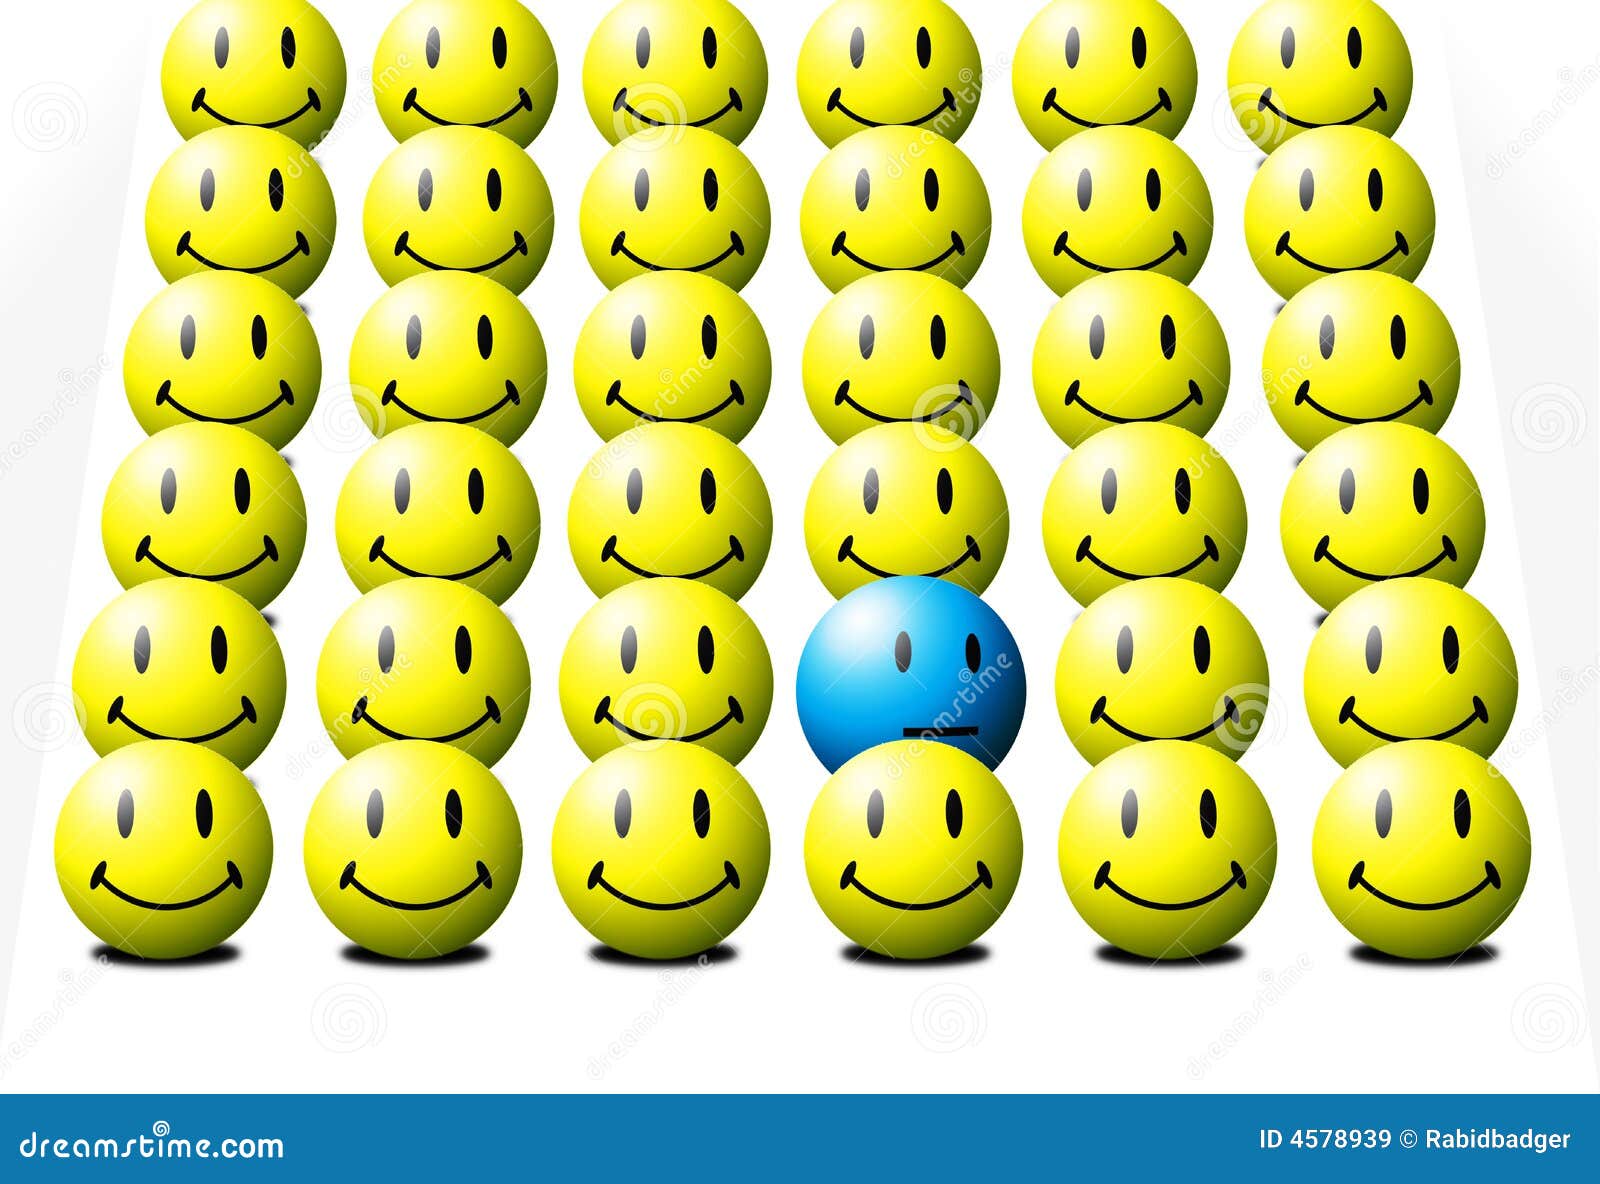 Odd One Out stock illustration. Illustration of unusually - 4578939